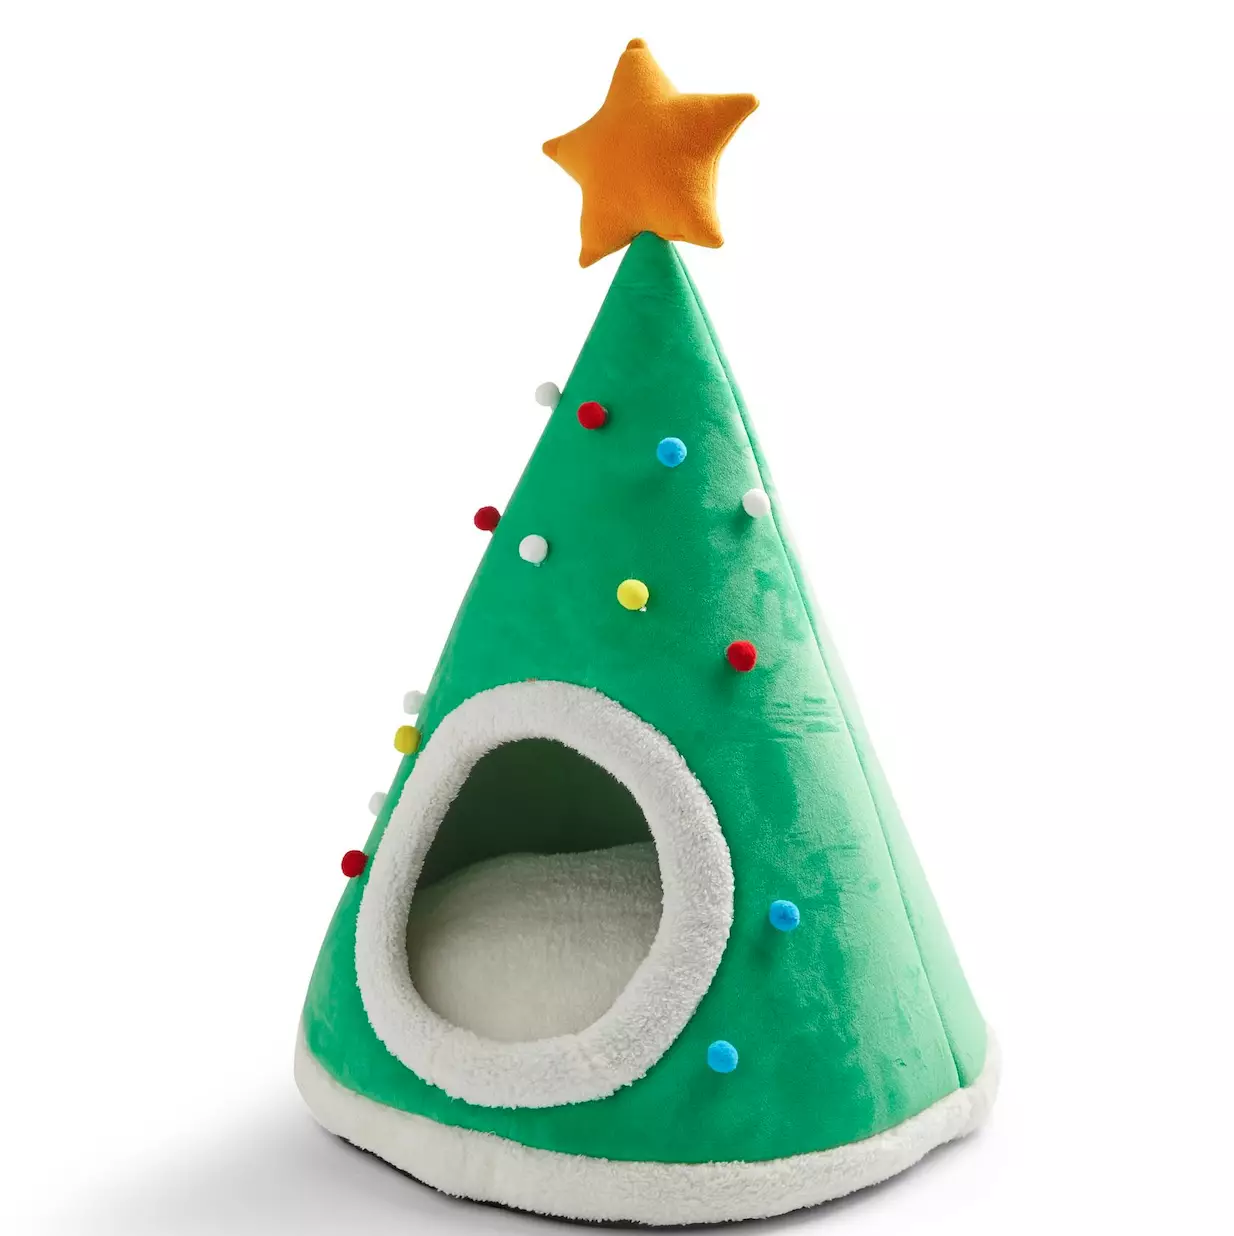 Primark is selling a Christmas pet bed (